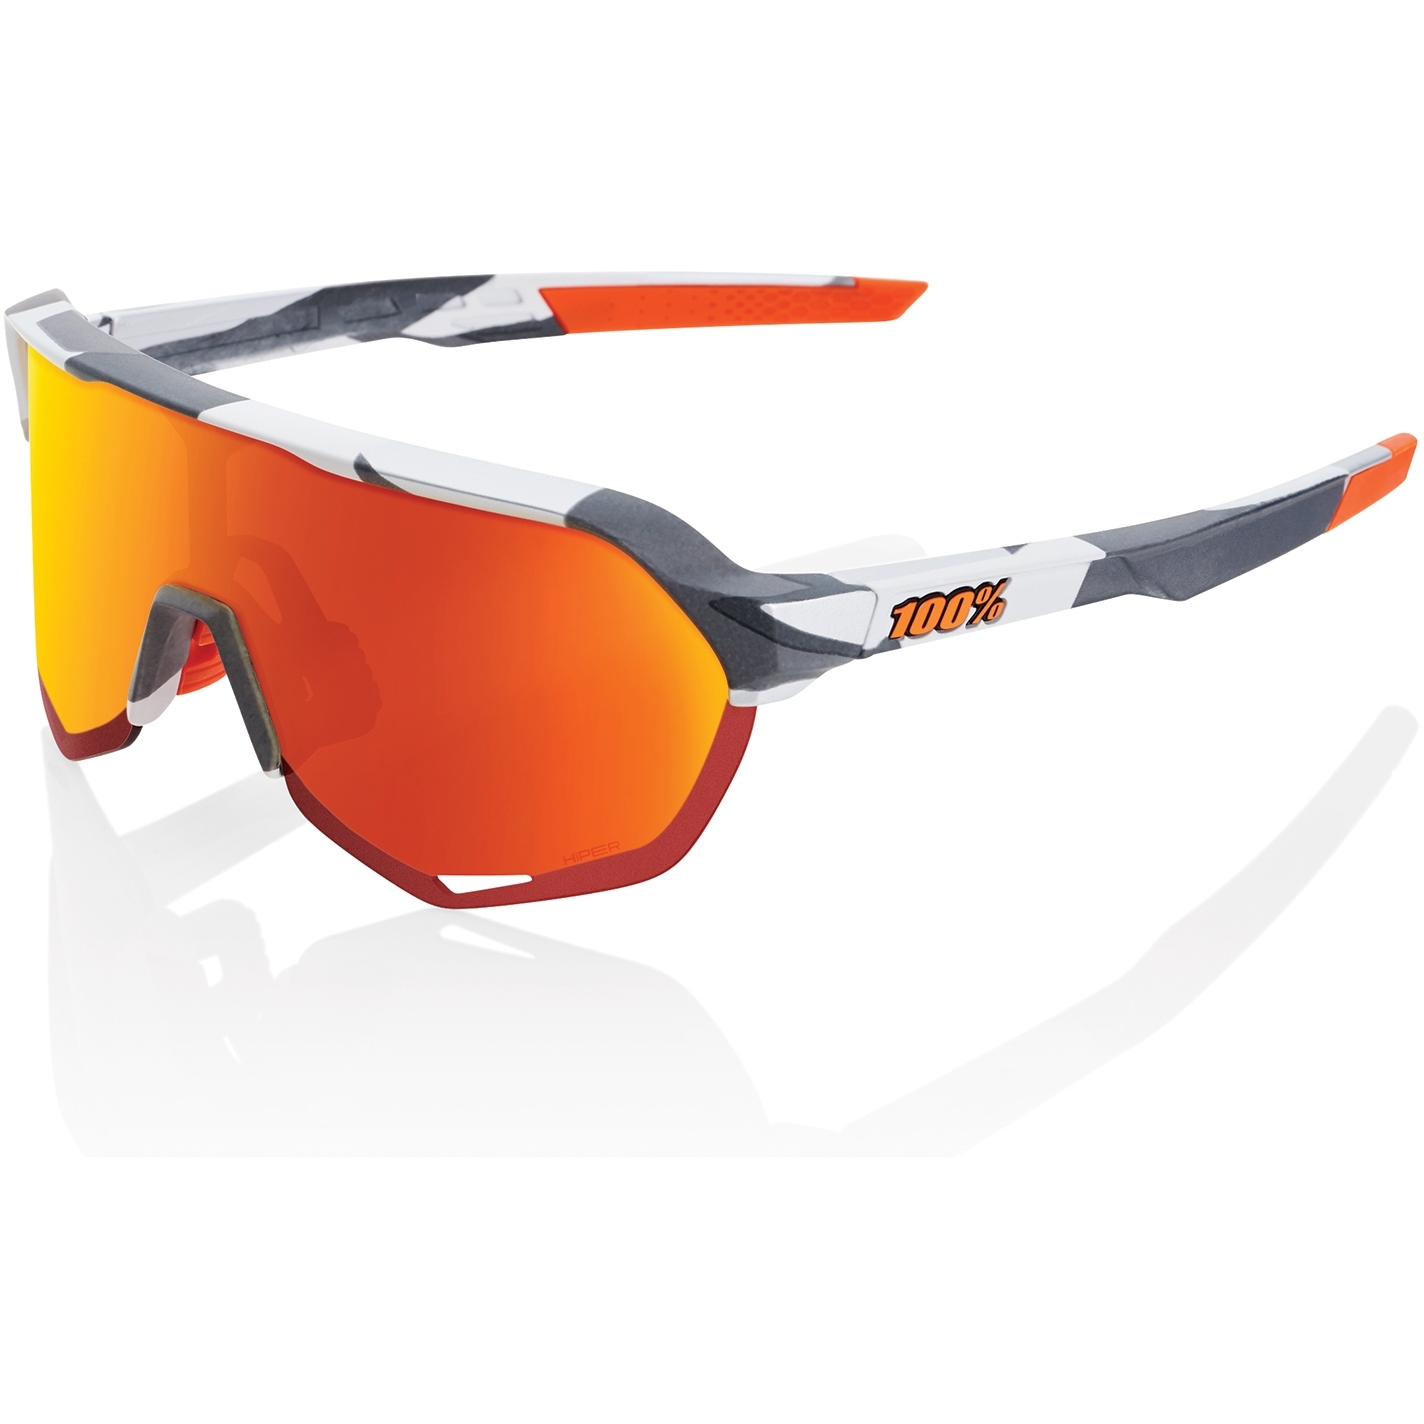 Image of 100% S2 Glasses - HiPER Mirror Lens - Soft Tact Grey Camo / Red Multilayer + Clear